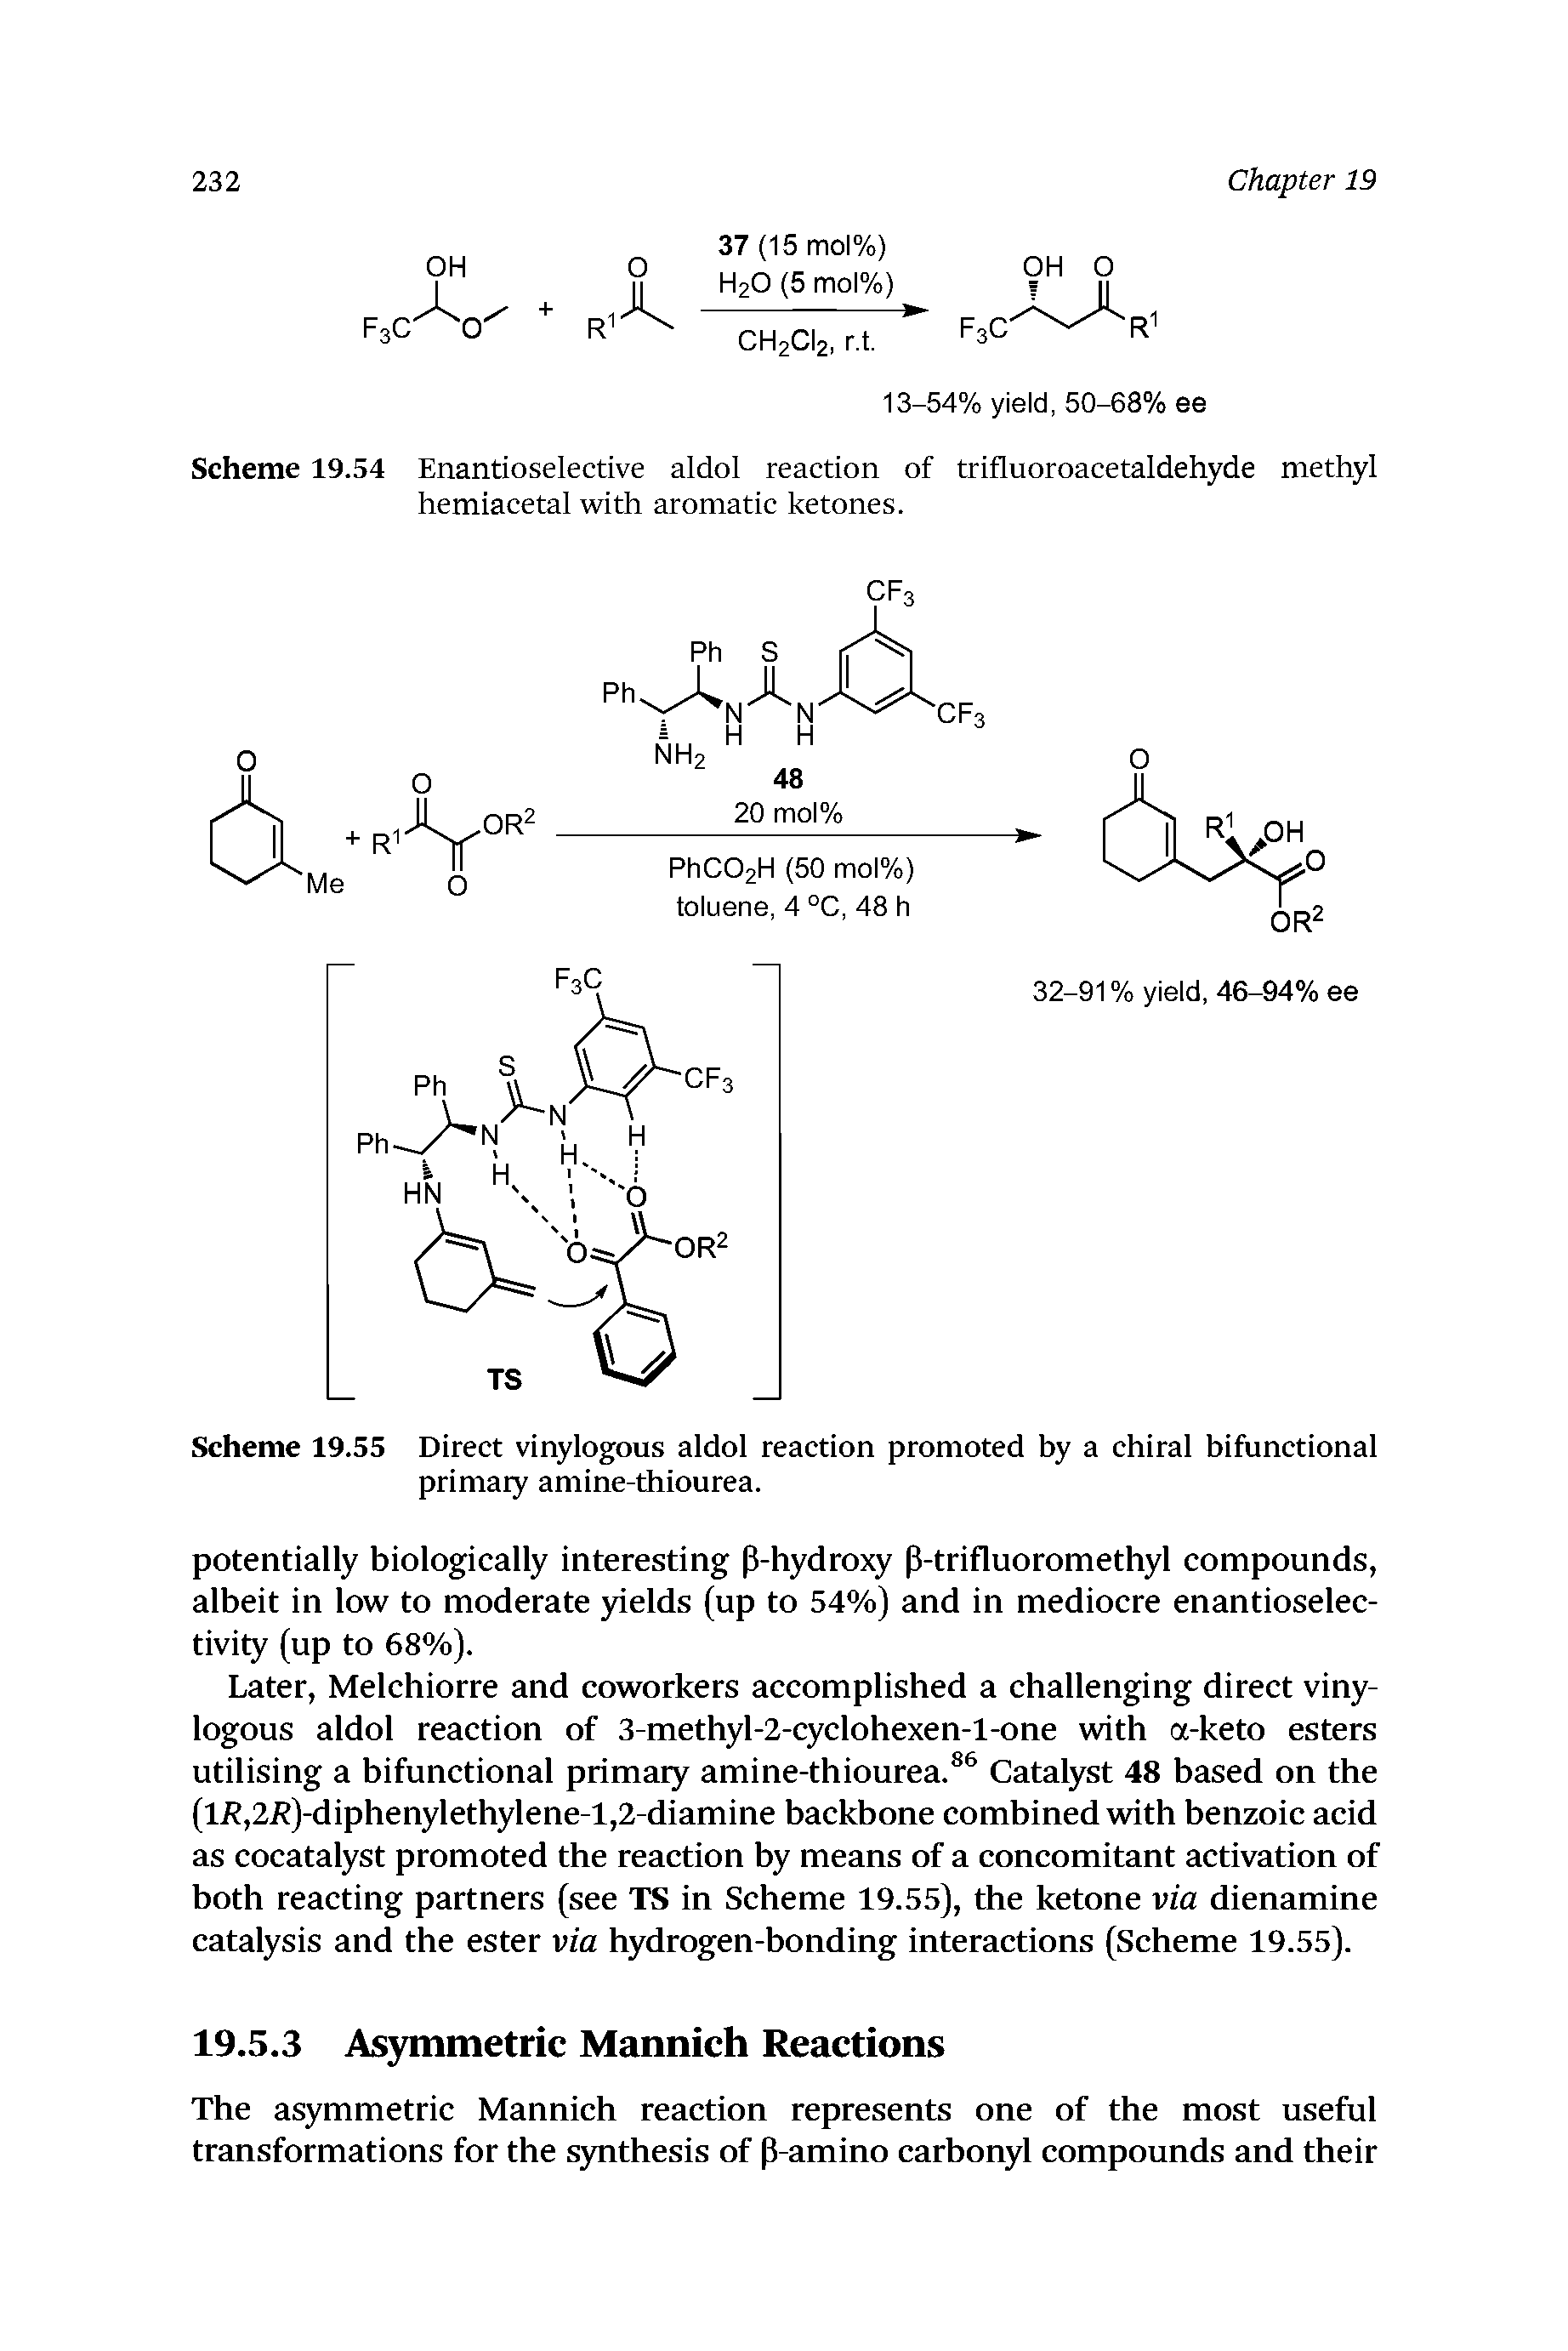 Scheme 19.55 Direct vinylogous aldol reaction promoted by a chiral bifunctional primary amine-thiourea.